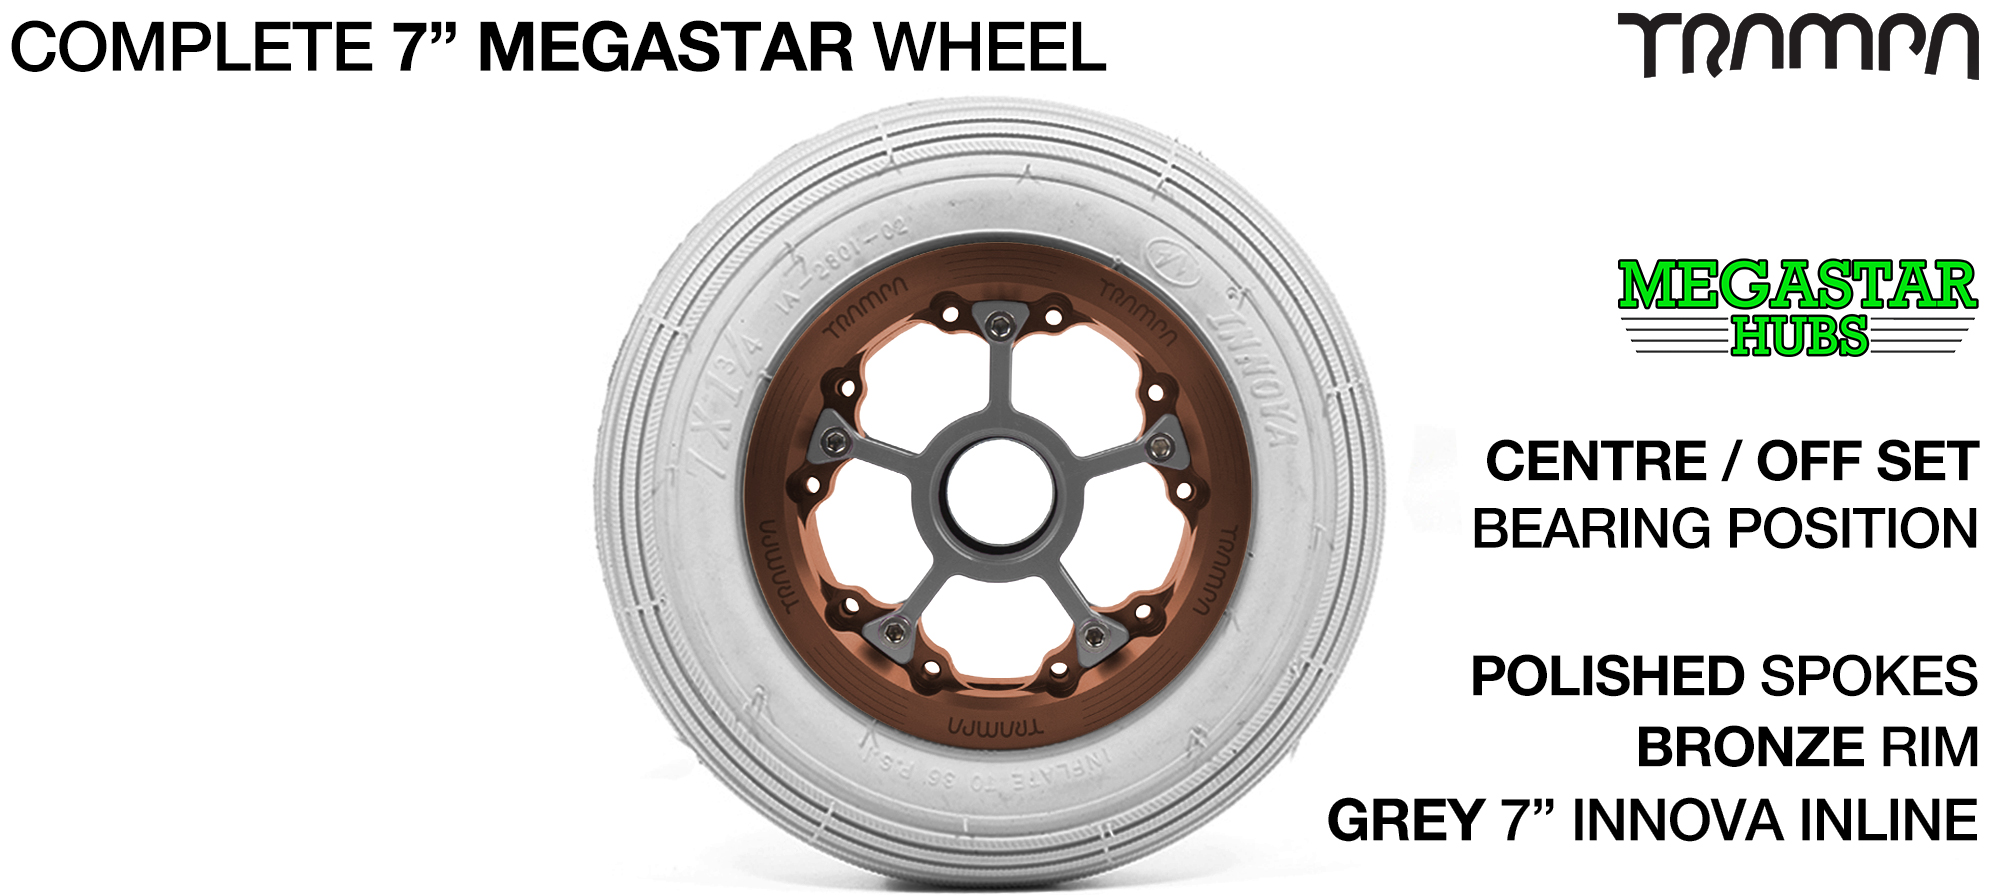 BRONZE MEGASTAR Rims with POLISHED Spokes & 7 Inch Tyres